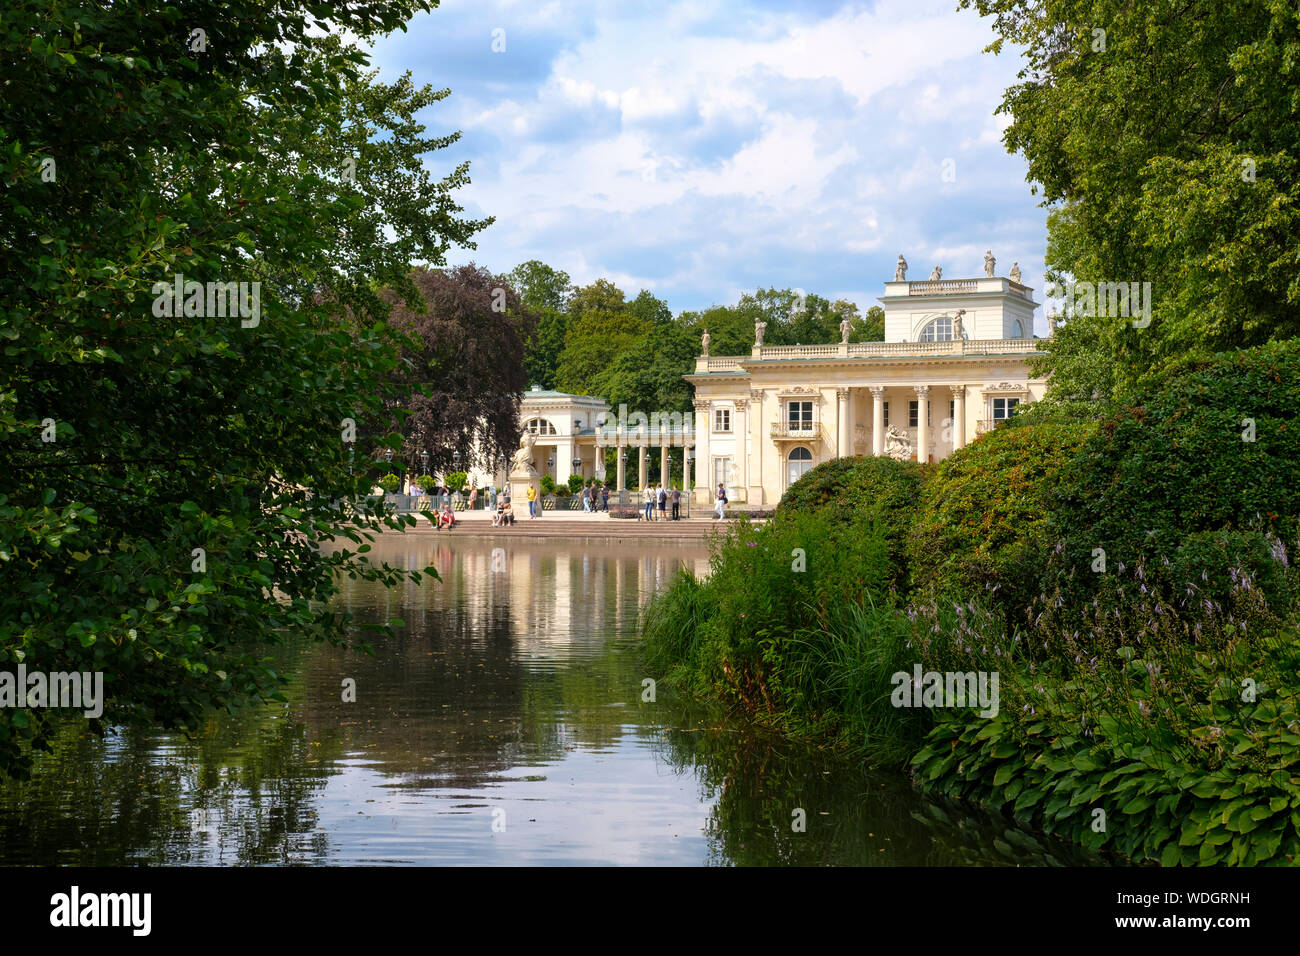 The Palace on the Water, in Lazienki Park, Warsaw, Poland. Stock Photo